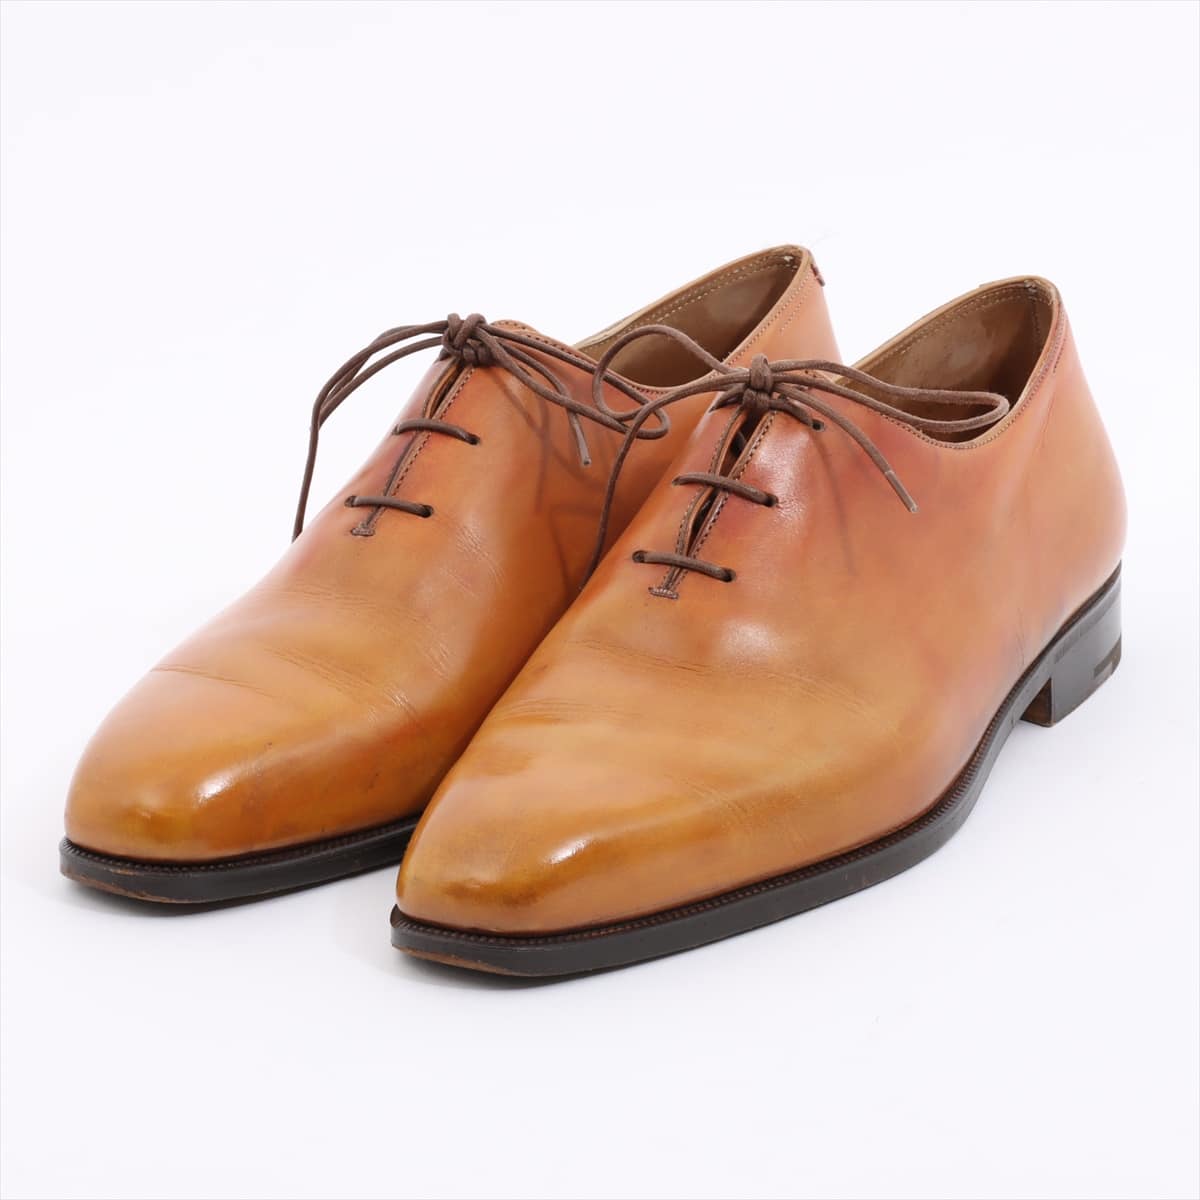 Berluti Alessandro Leather Leather shoes 6 Men's Brown Genuine shoe tree available